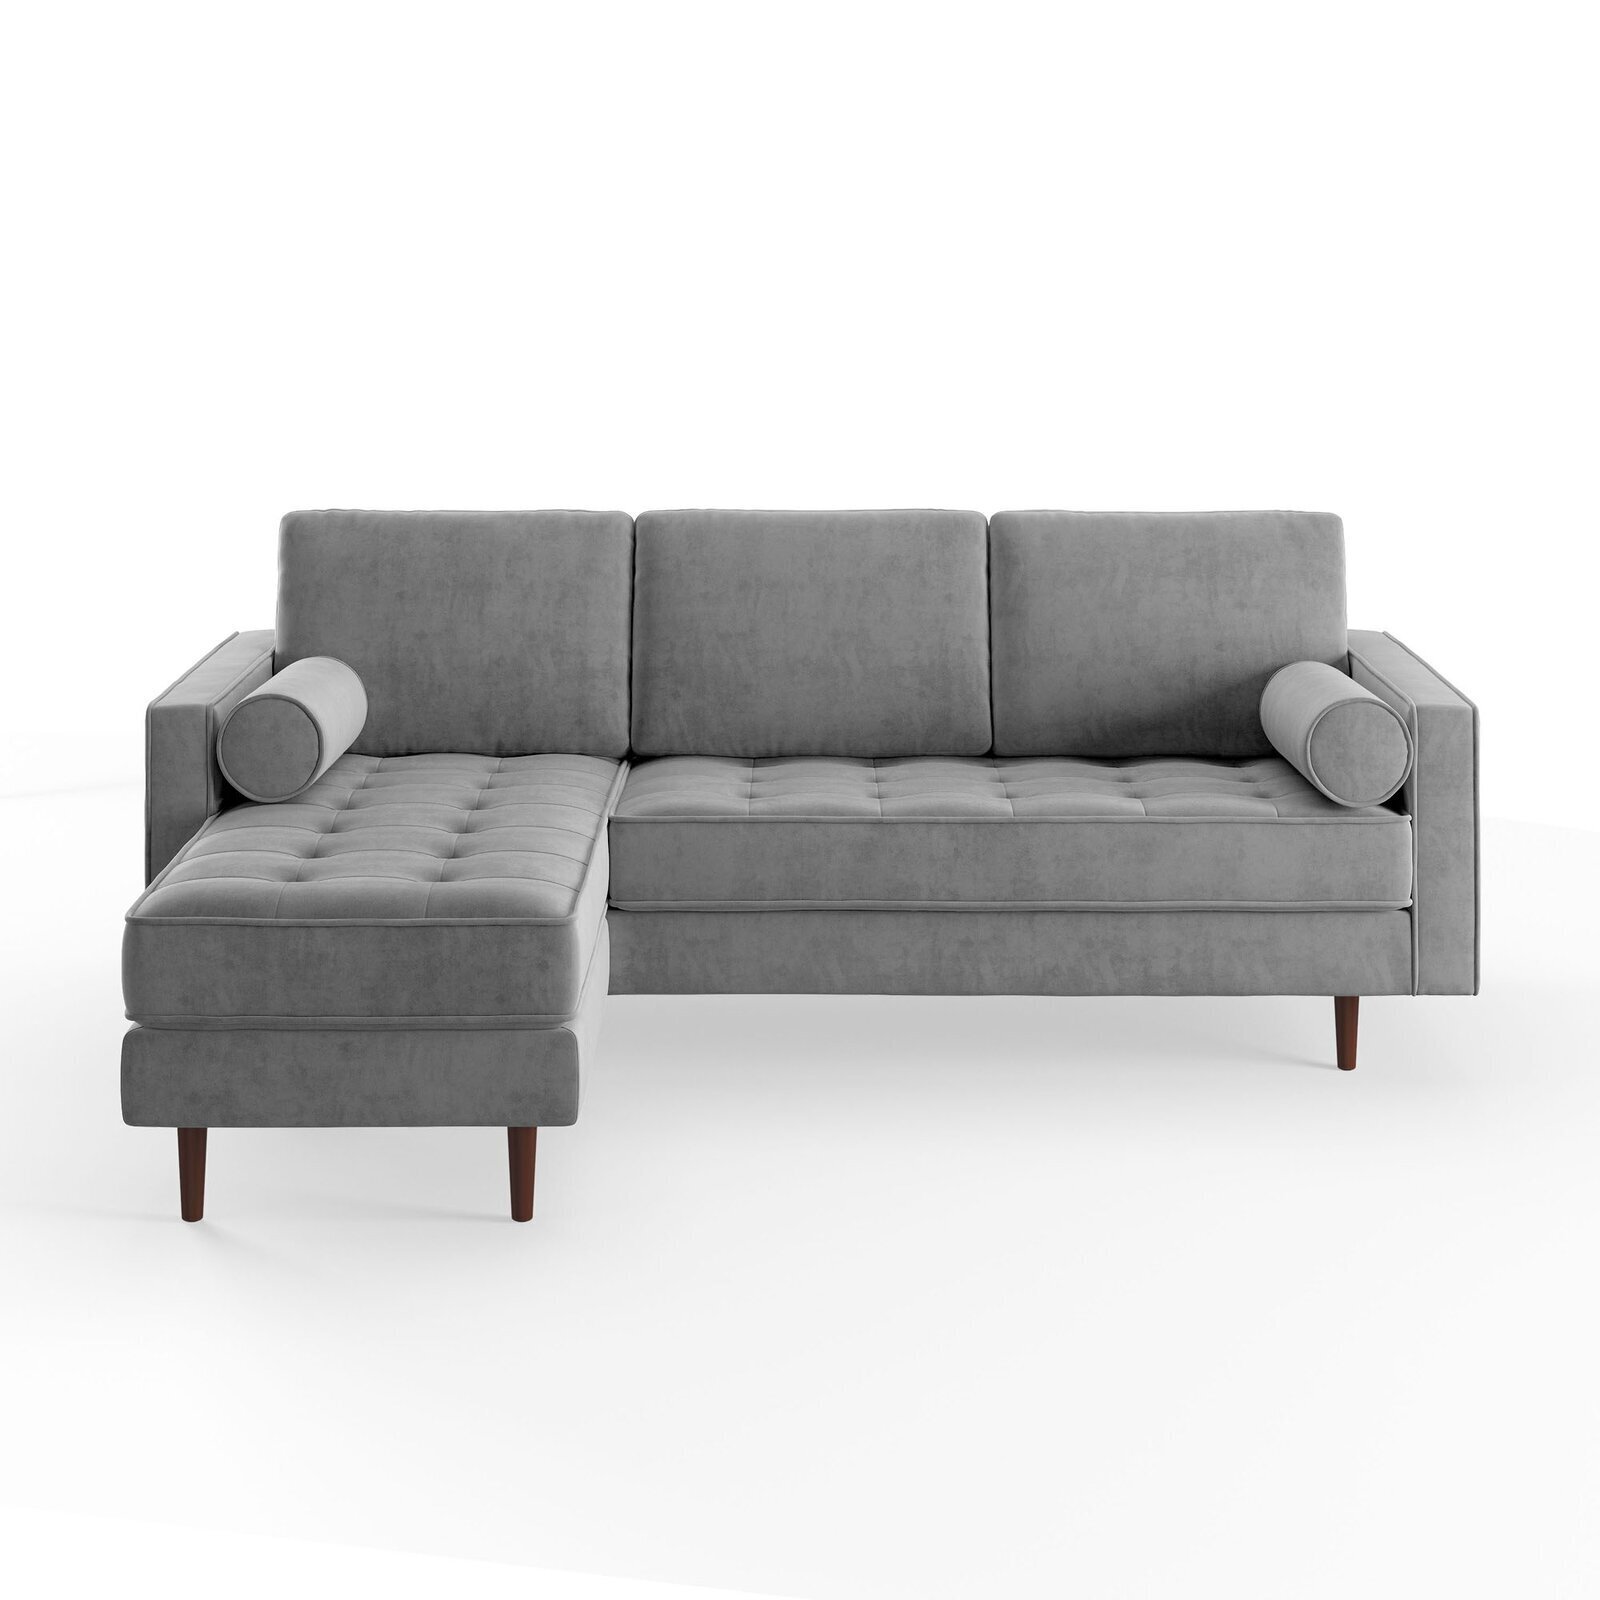 Modern Tufted Sectional Couch for Small Spaces